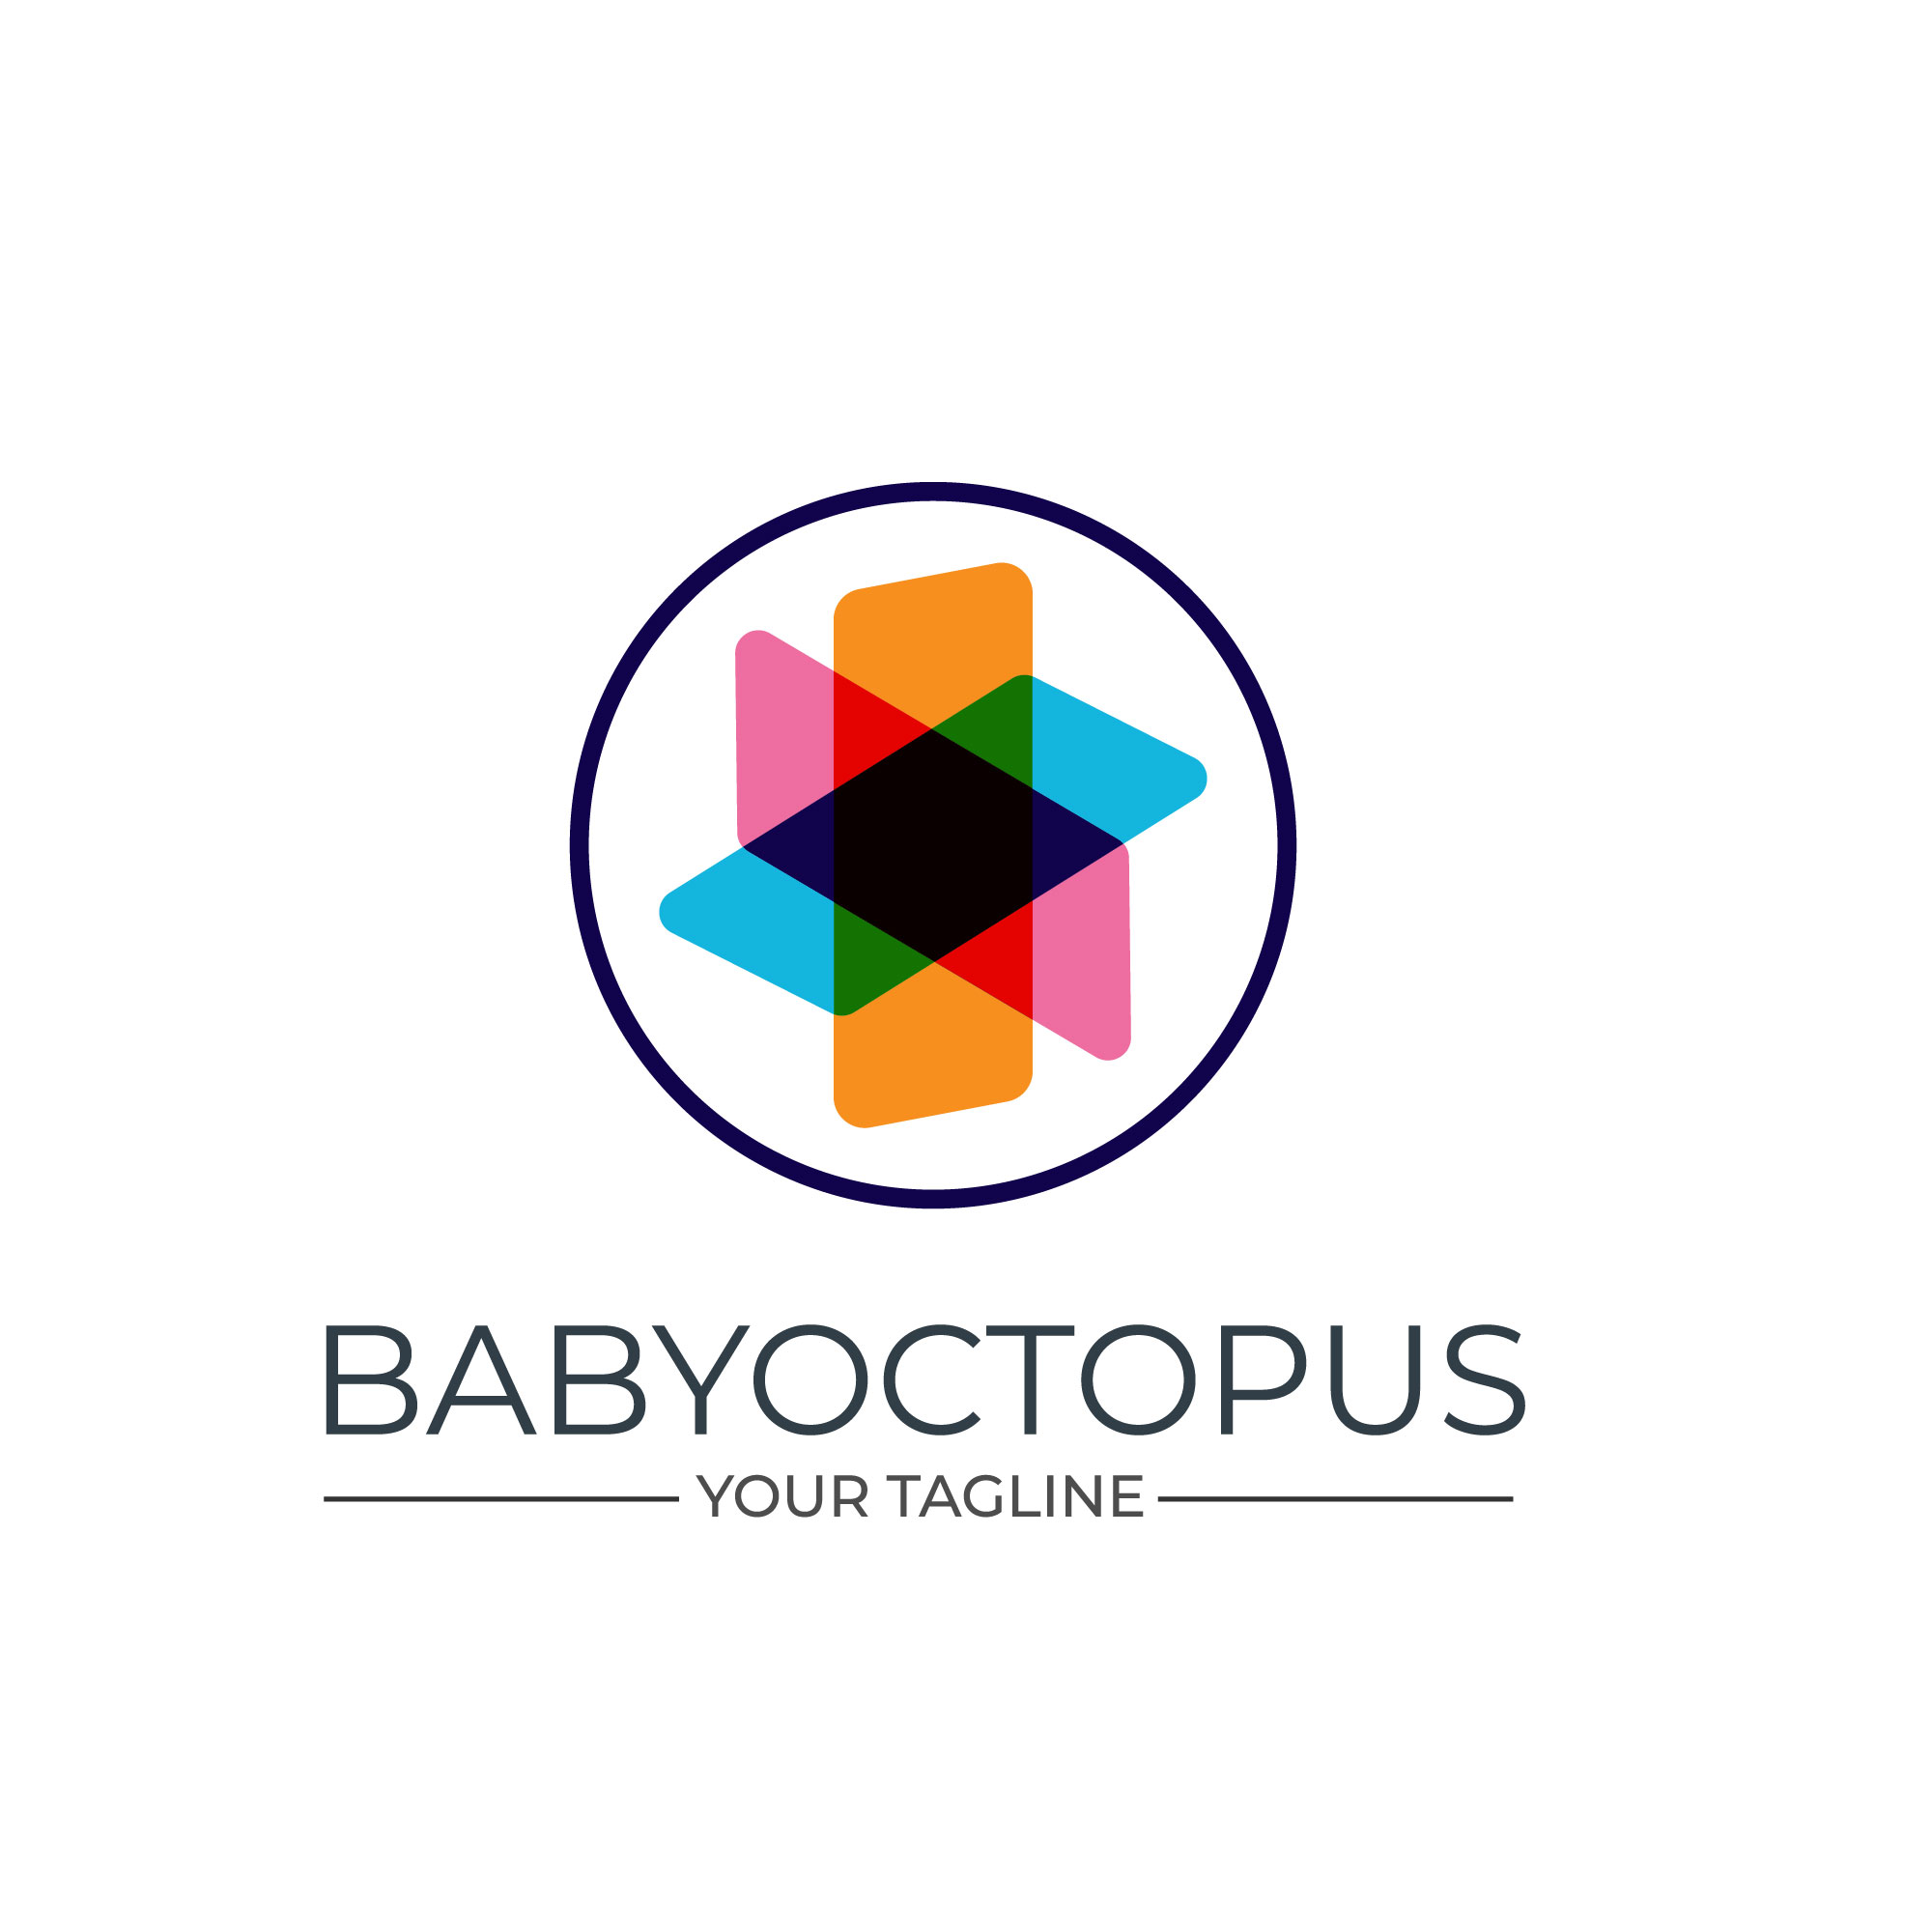 Baby octopus logo for kids company